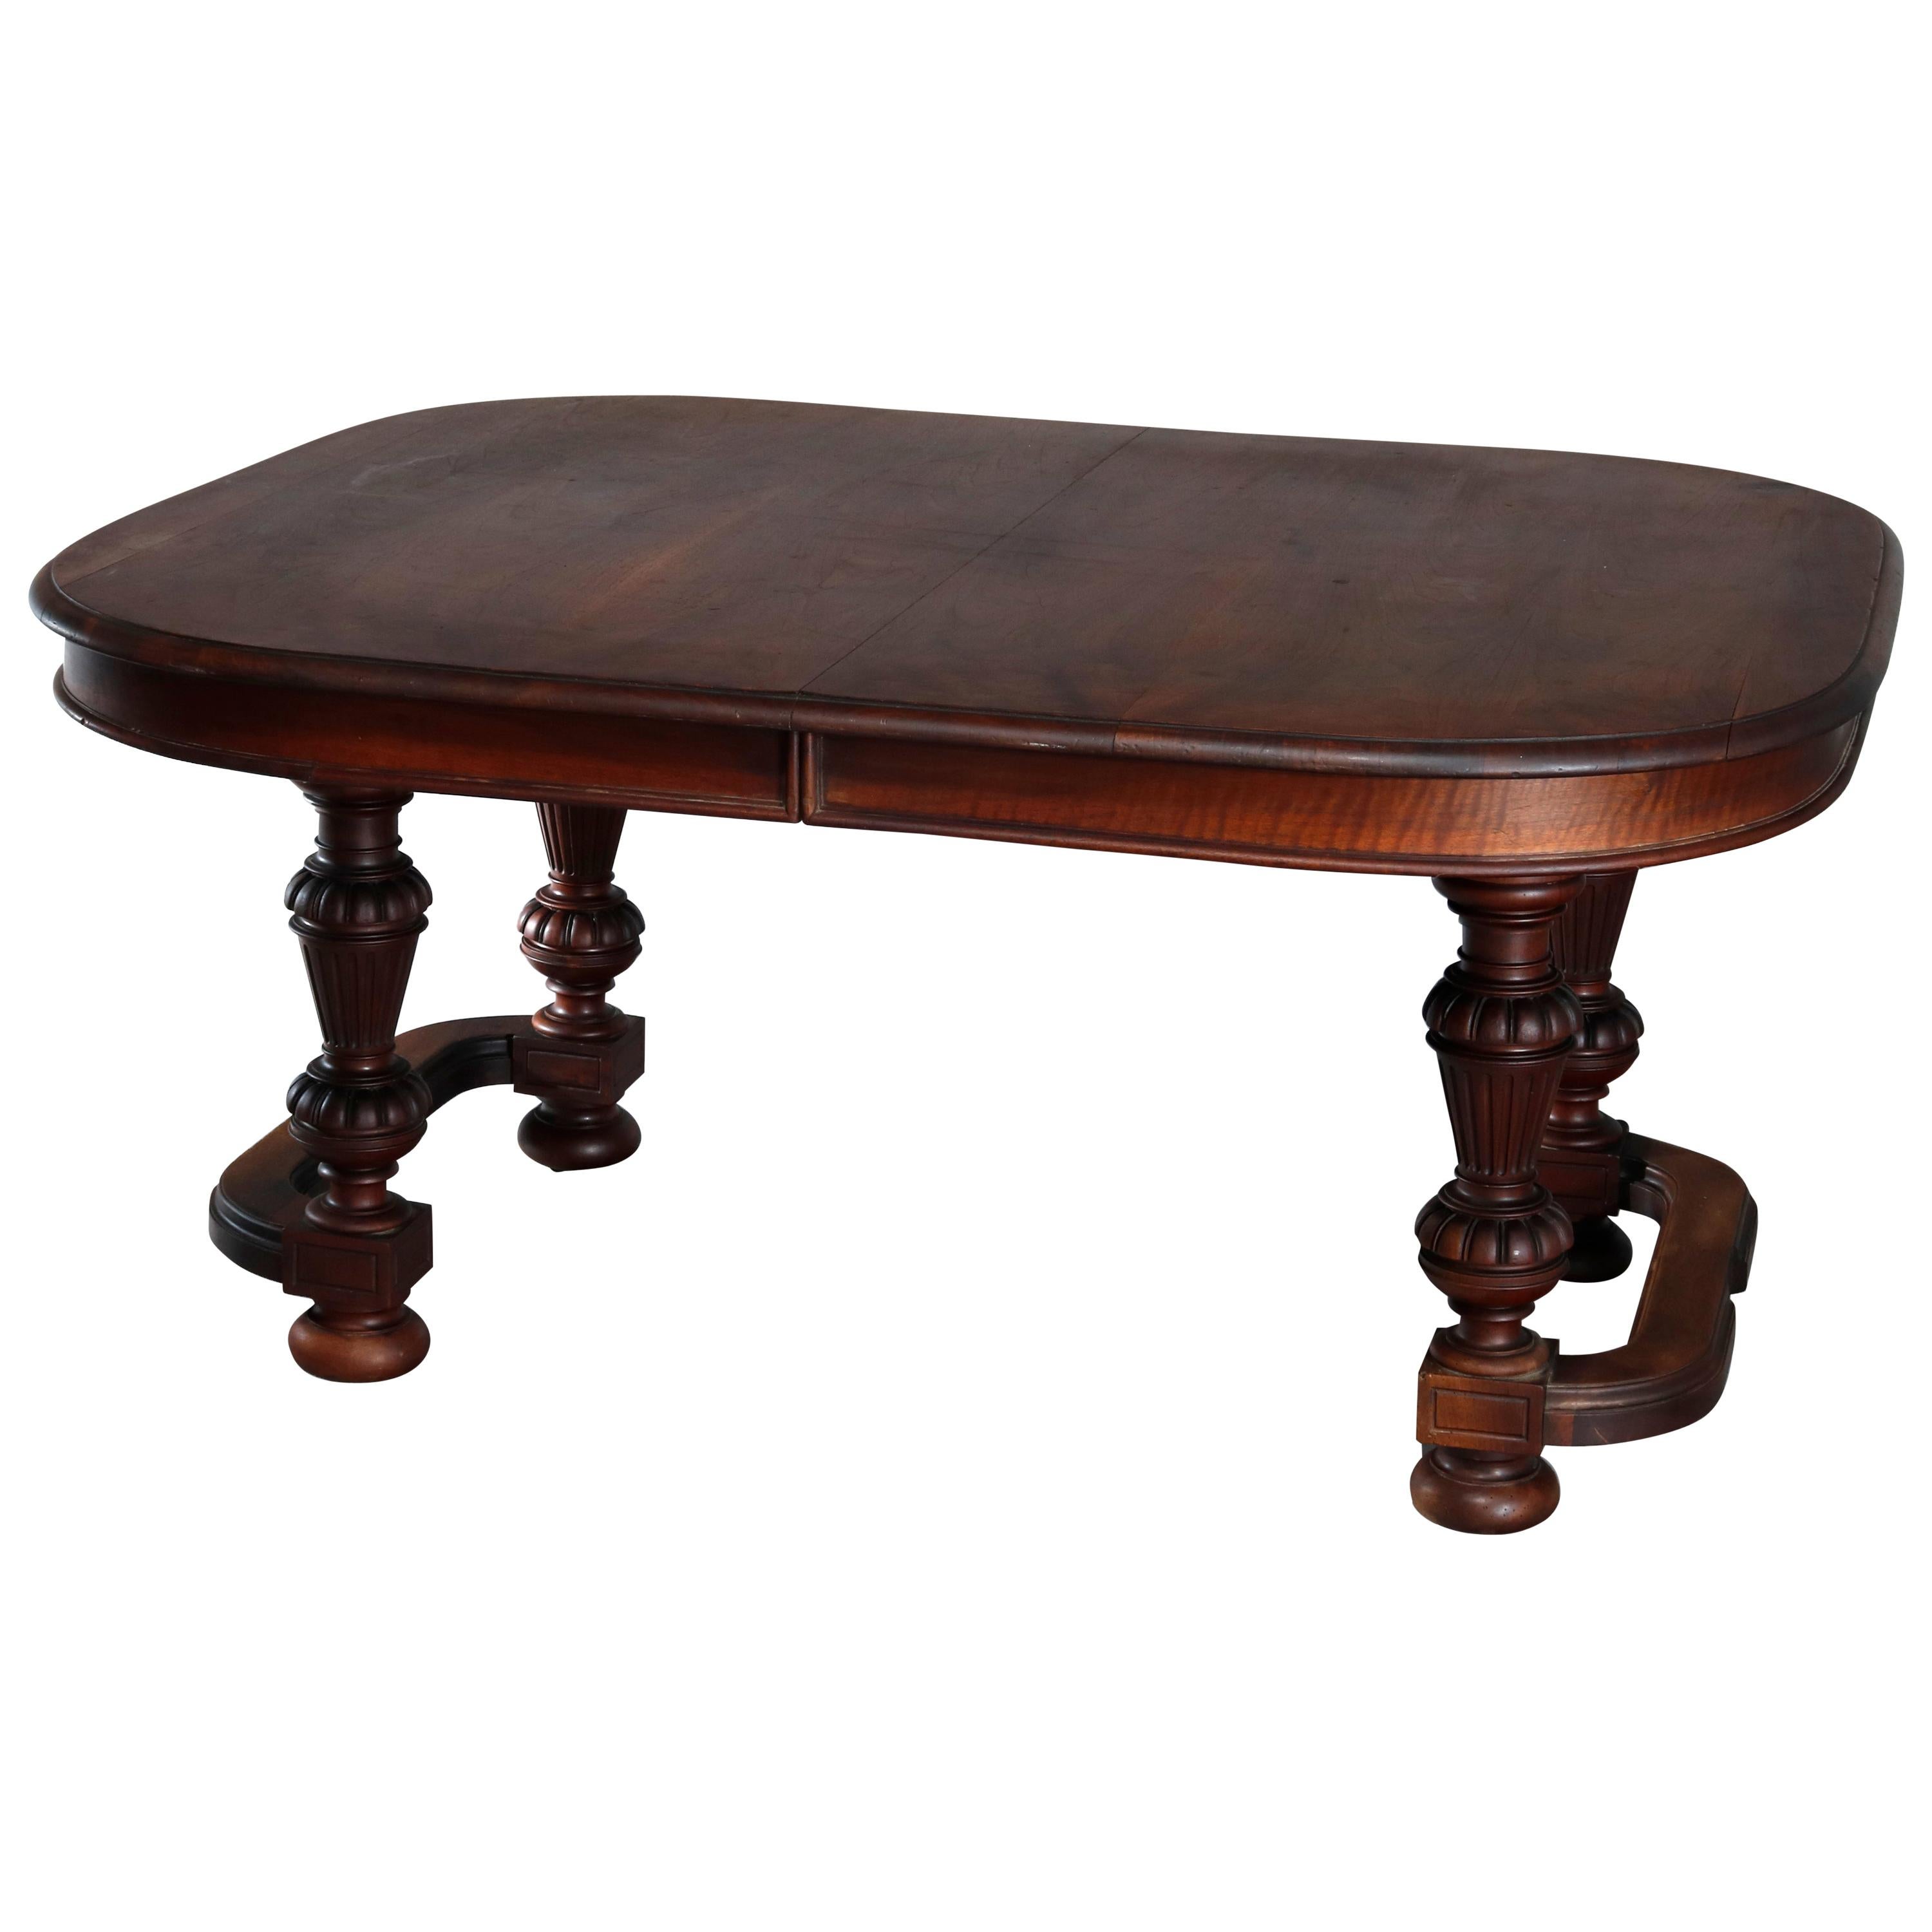 Antique French Renaissance Carved Walnut Dining Table, 19th Century